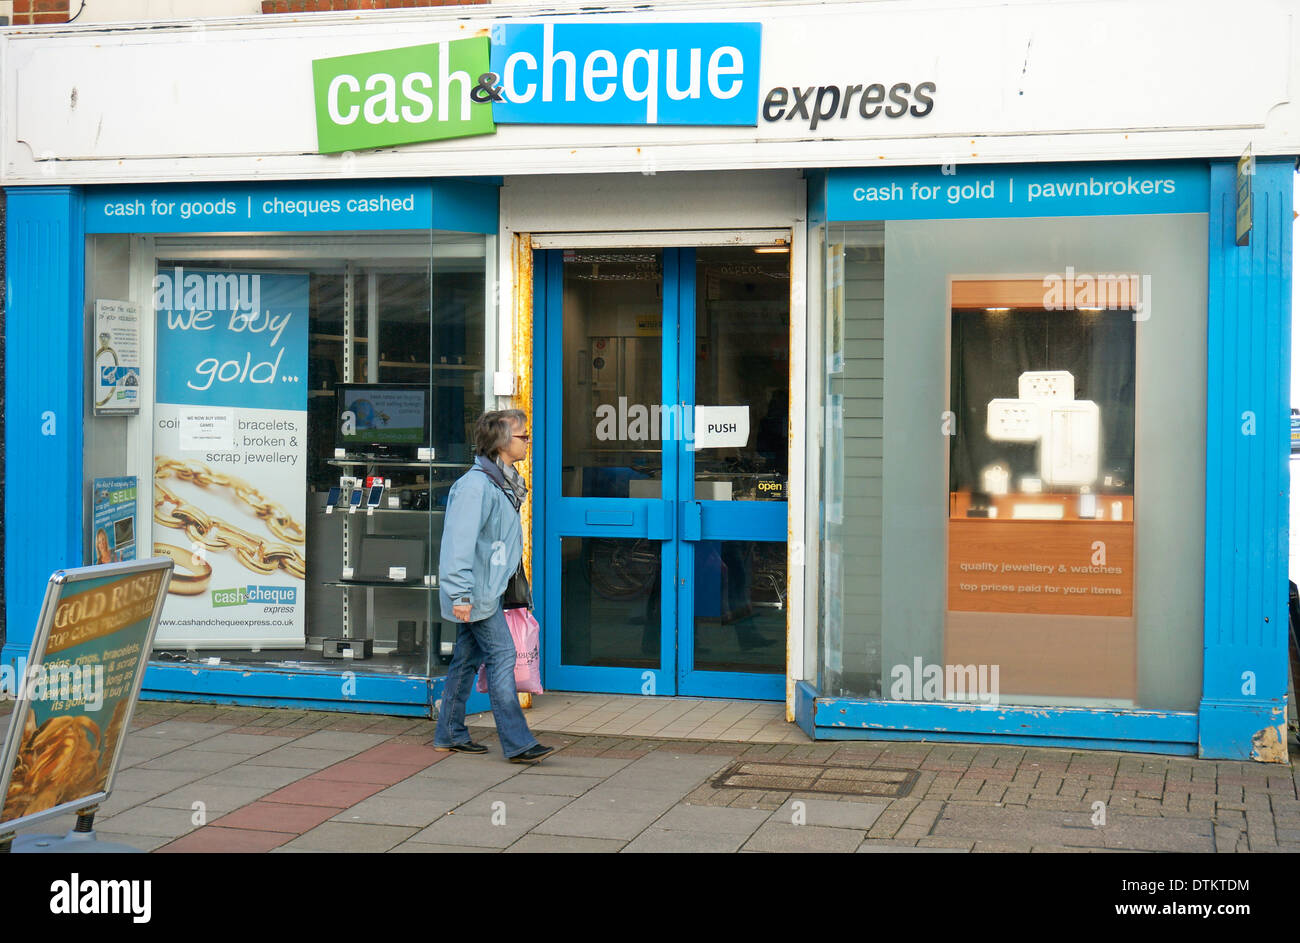 Cash & Cheque Express Pawnbrokers shop retailer (cash for items cheques cashed) Stock Photo